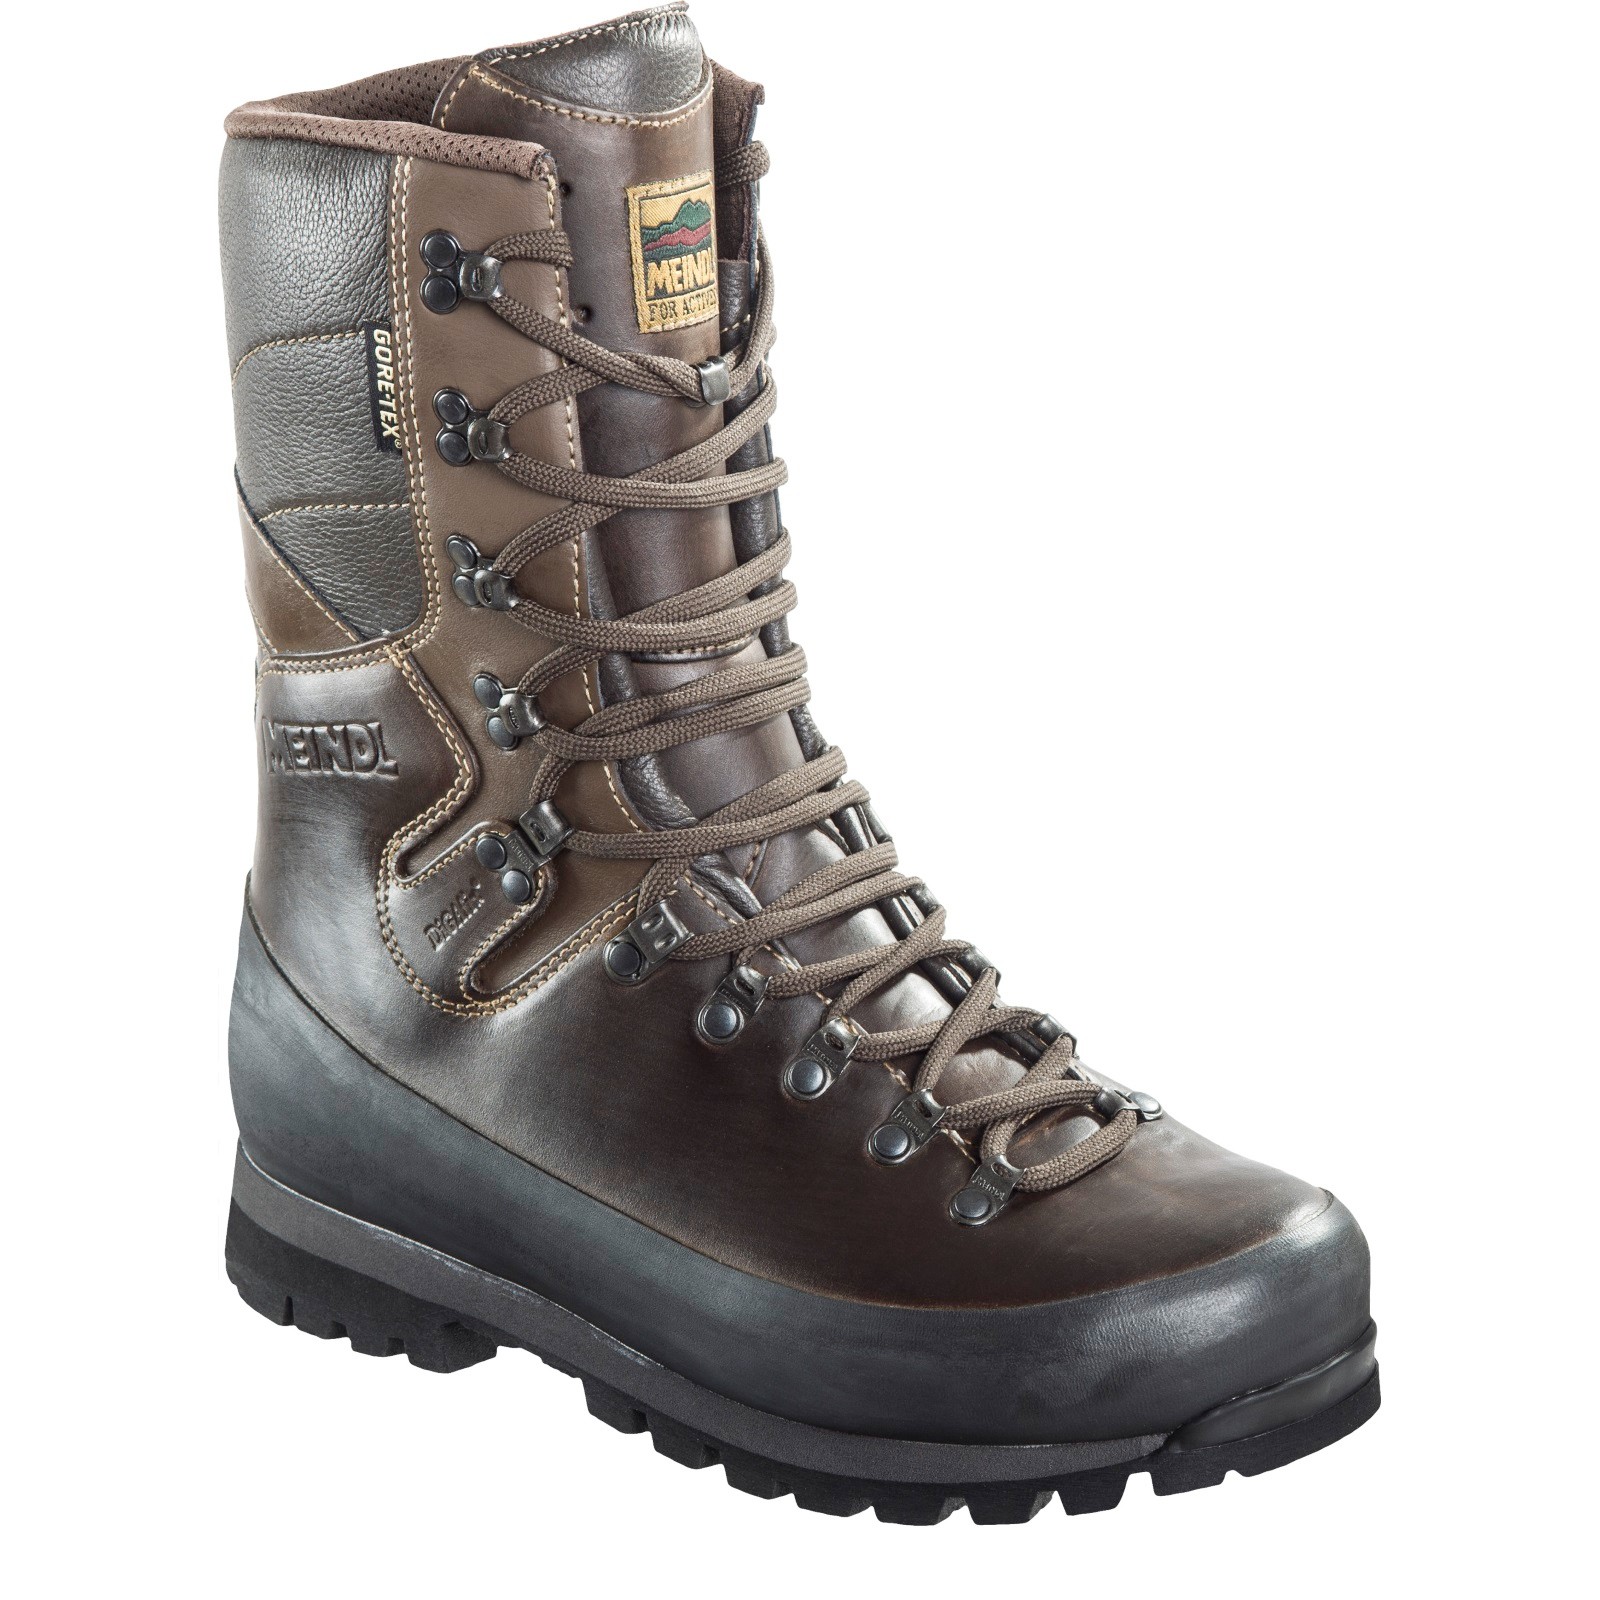 Meindl Dovre Extreme Gore-Tex Wide Brown